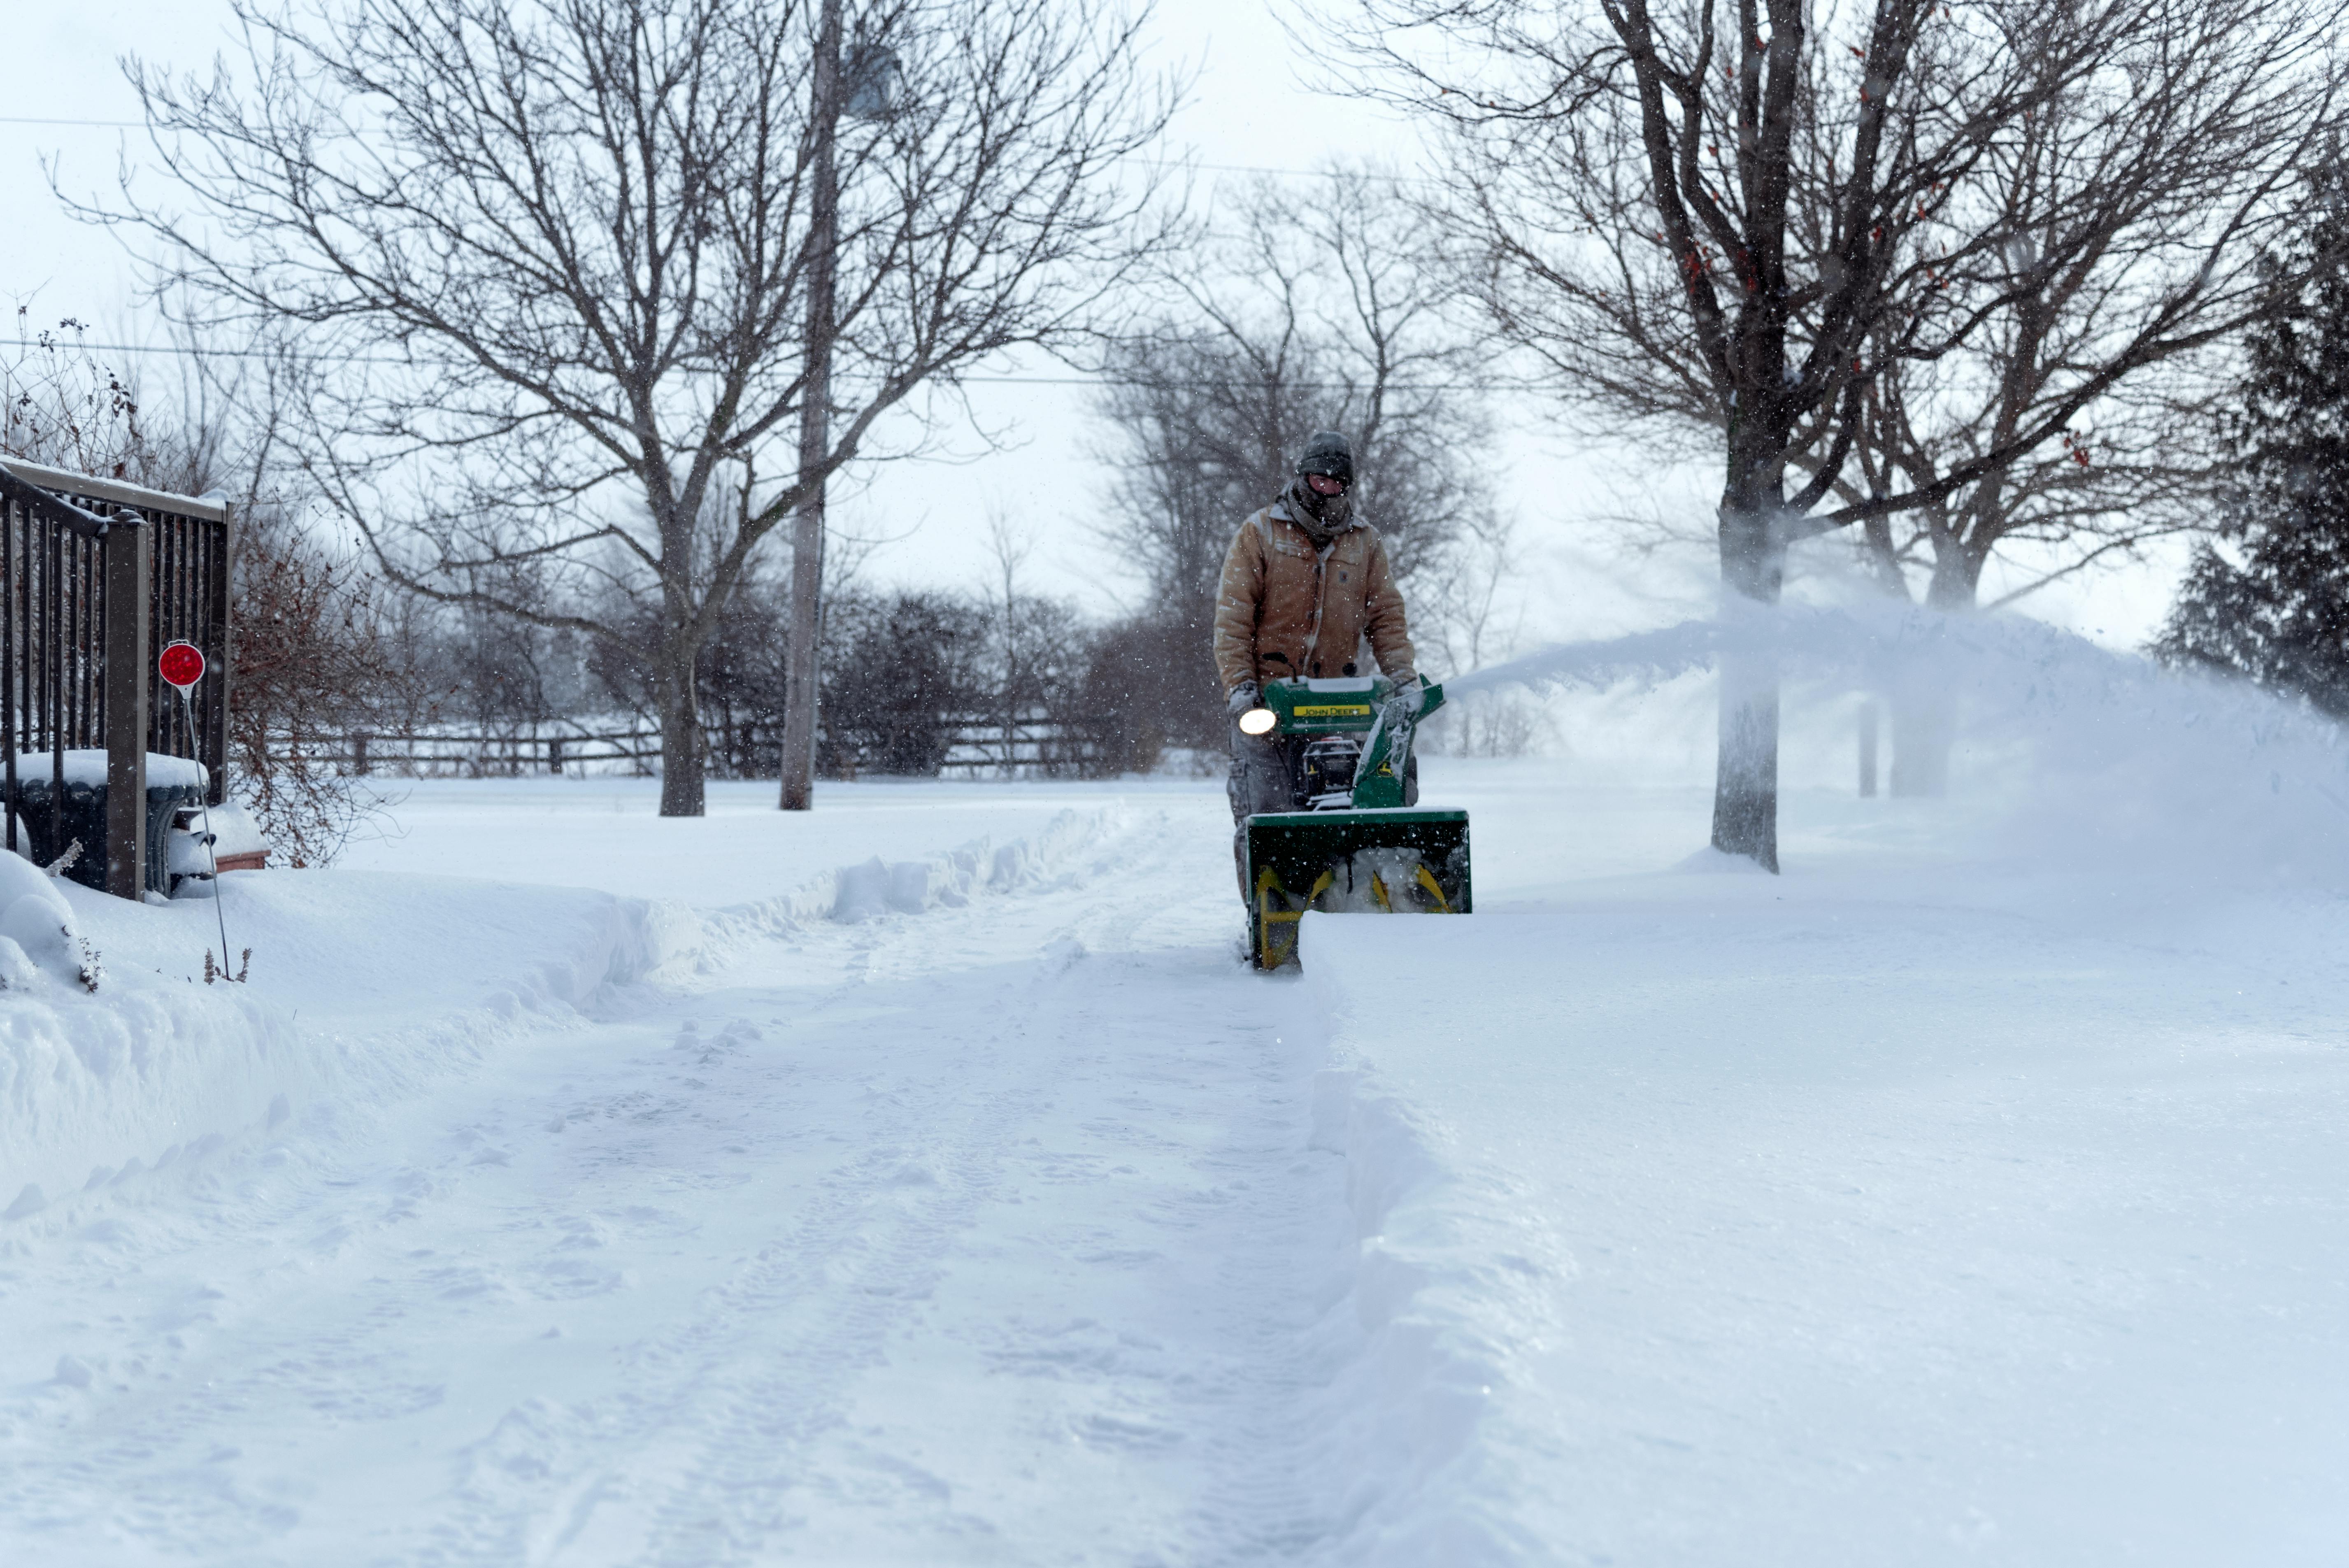 Snowblower for Sale: Find the Perfect Machine for Winter